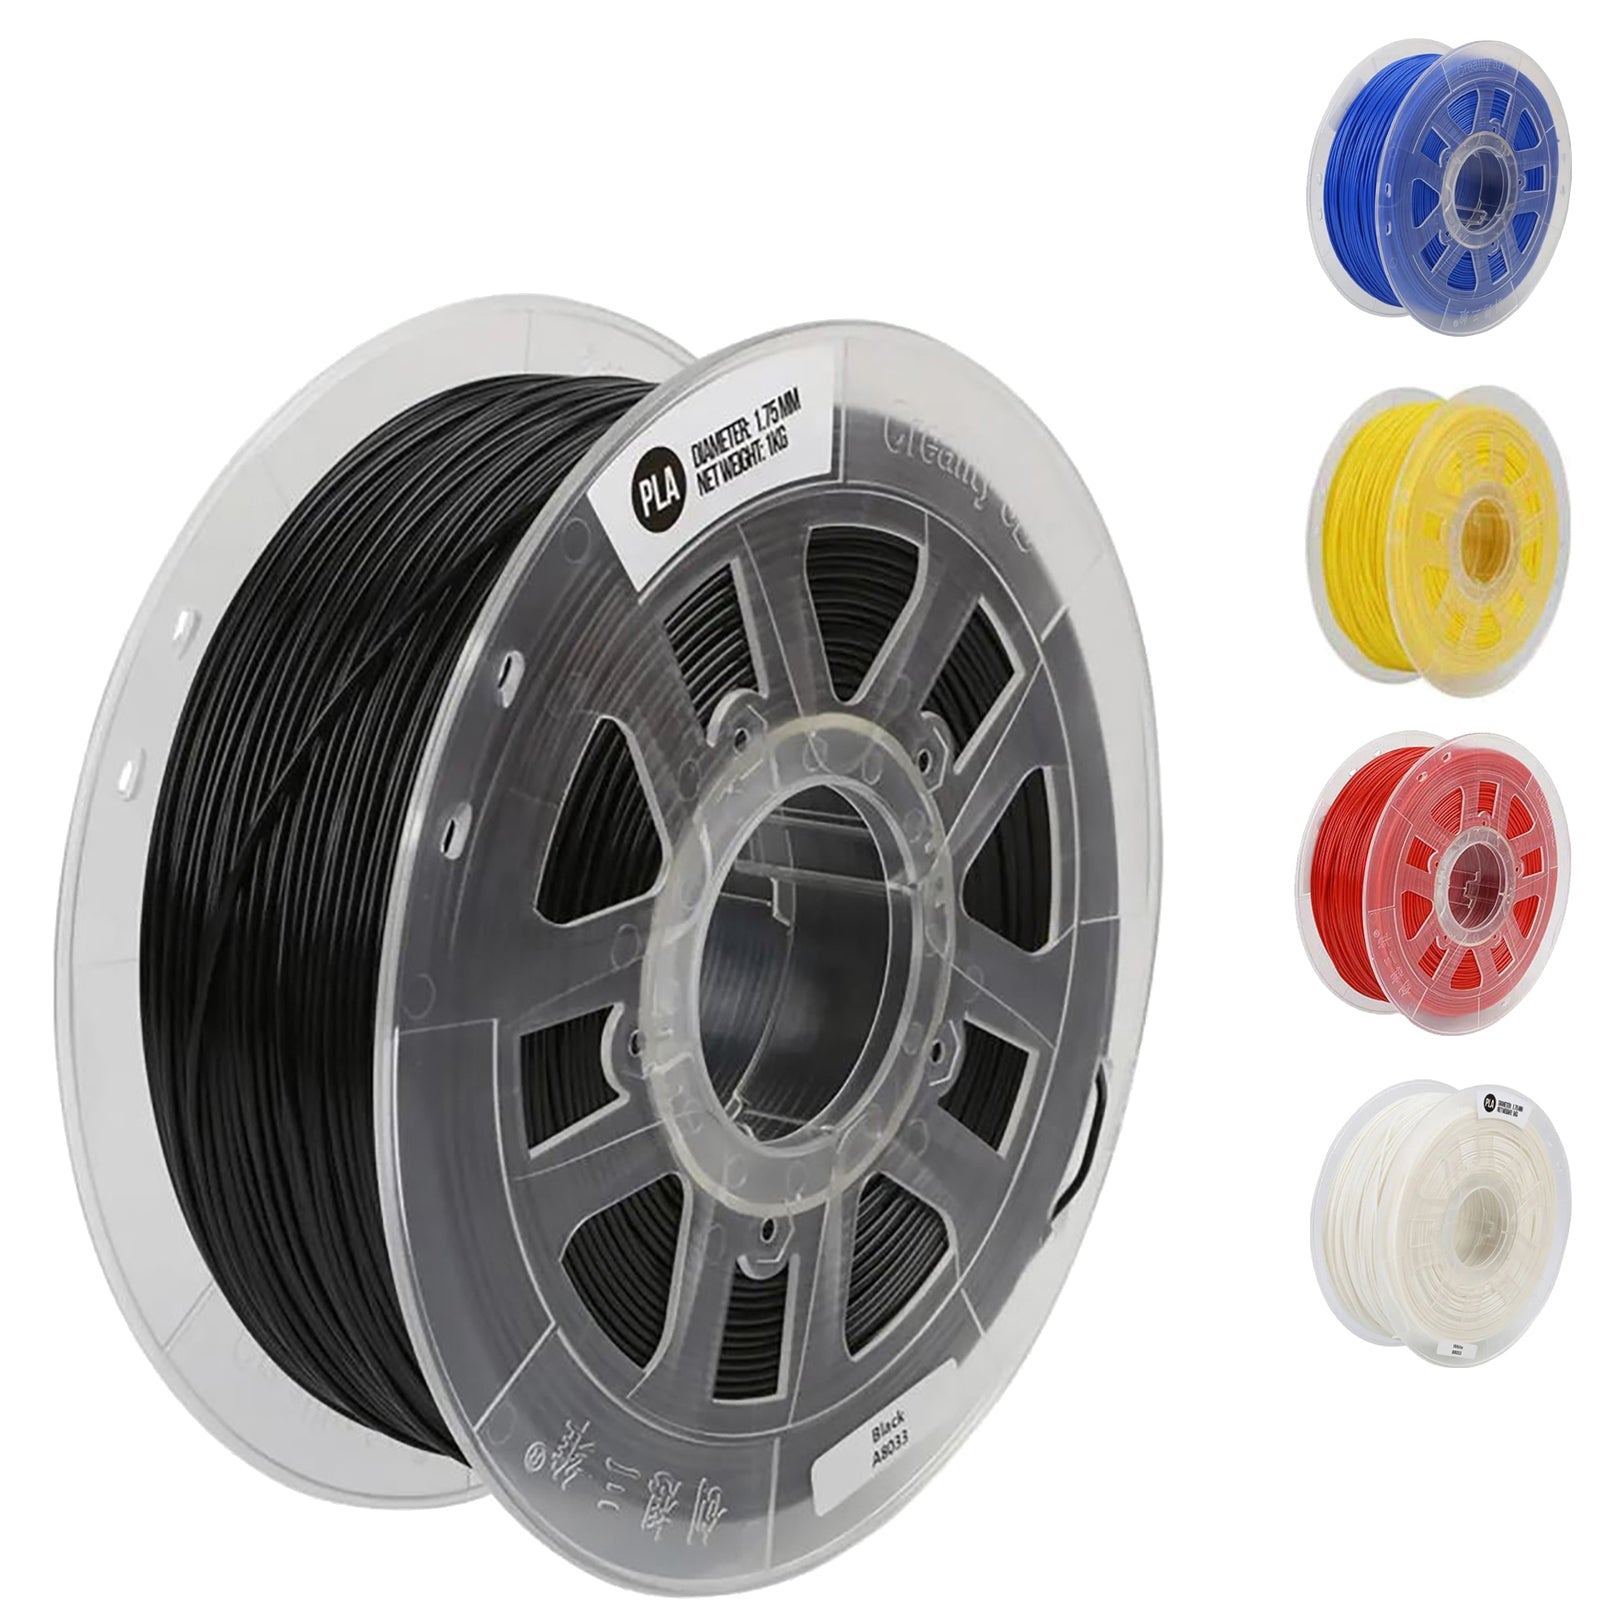 Creality 3D 1KG 1.75mm PLA Printing Filament FDM Material Supply For 3D Printer